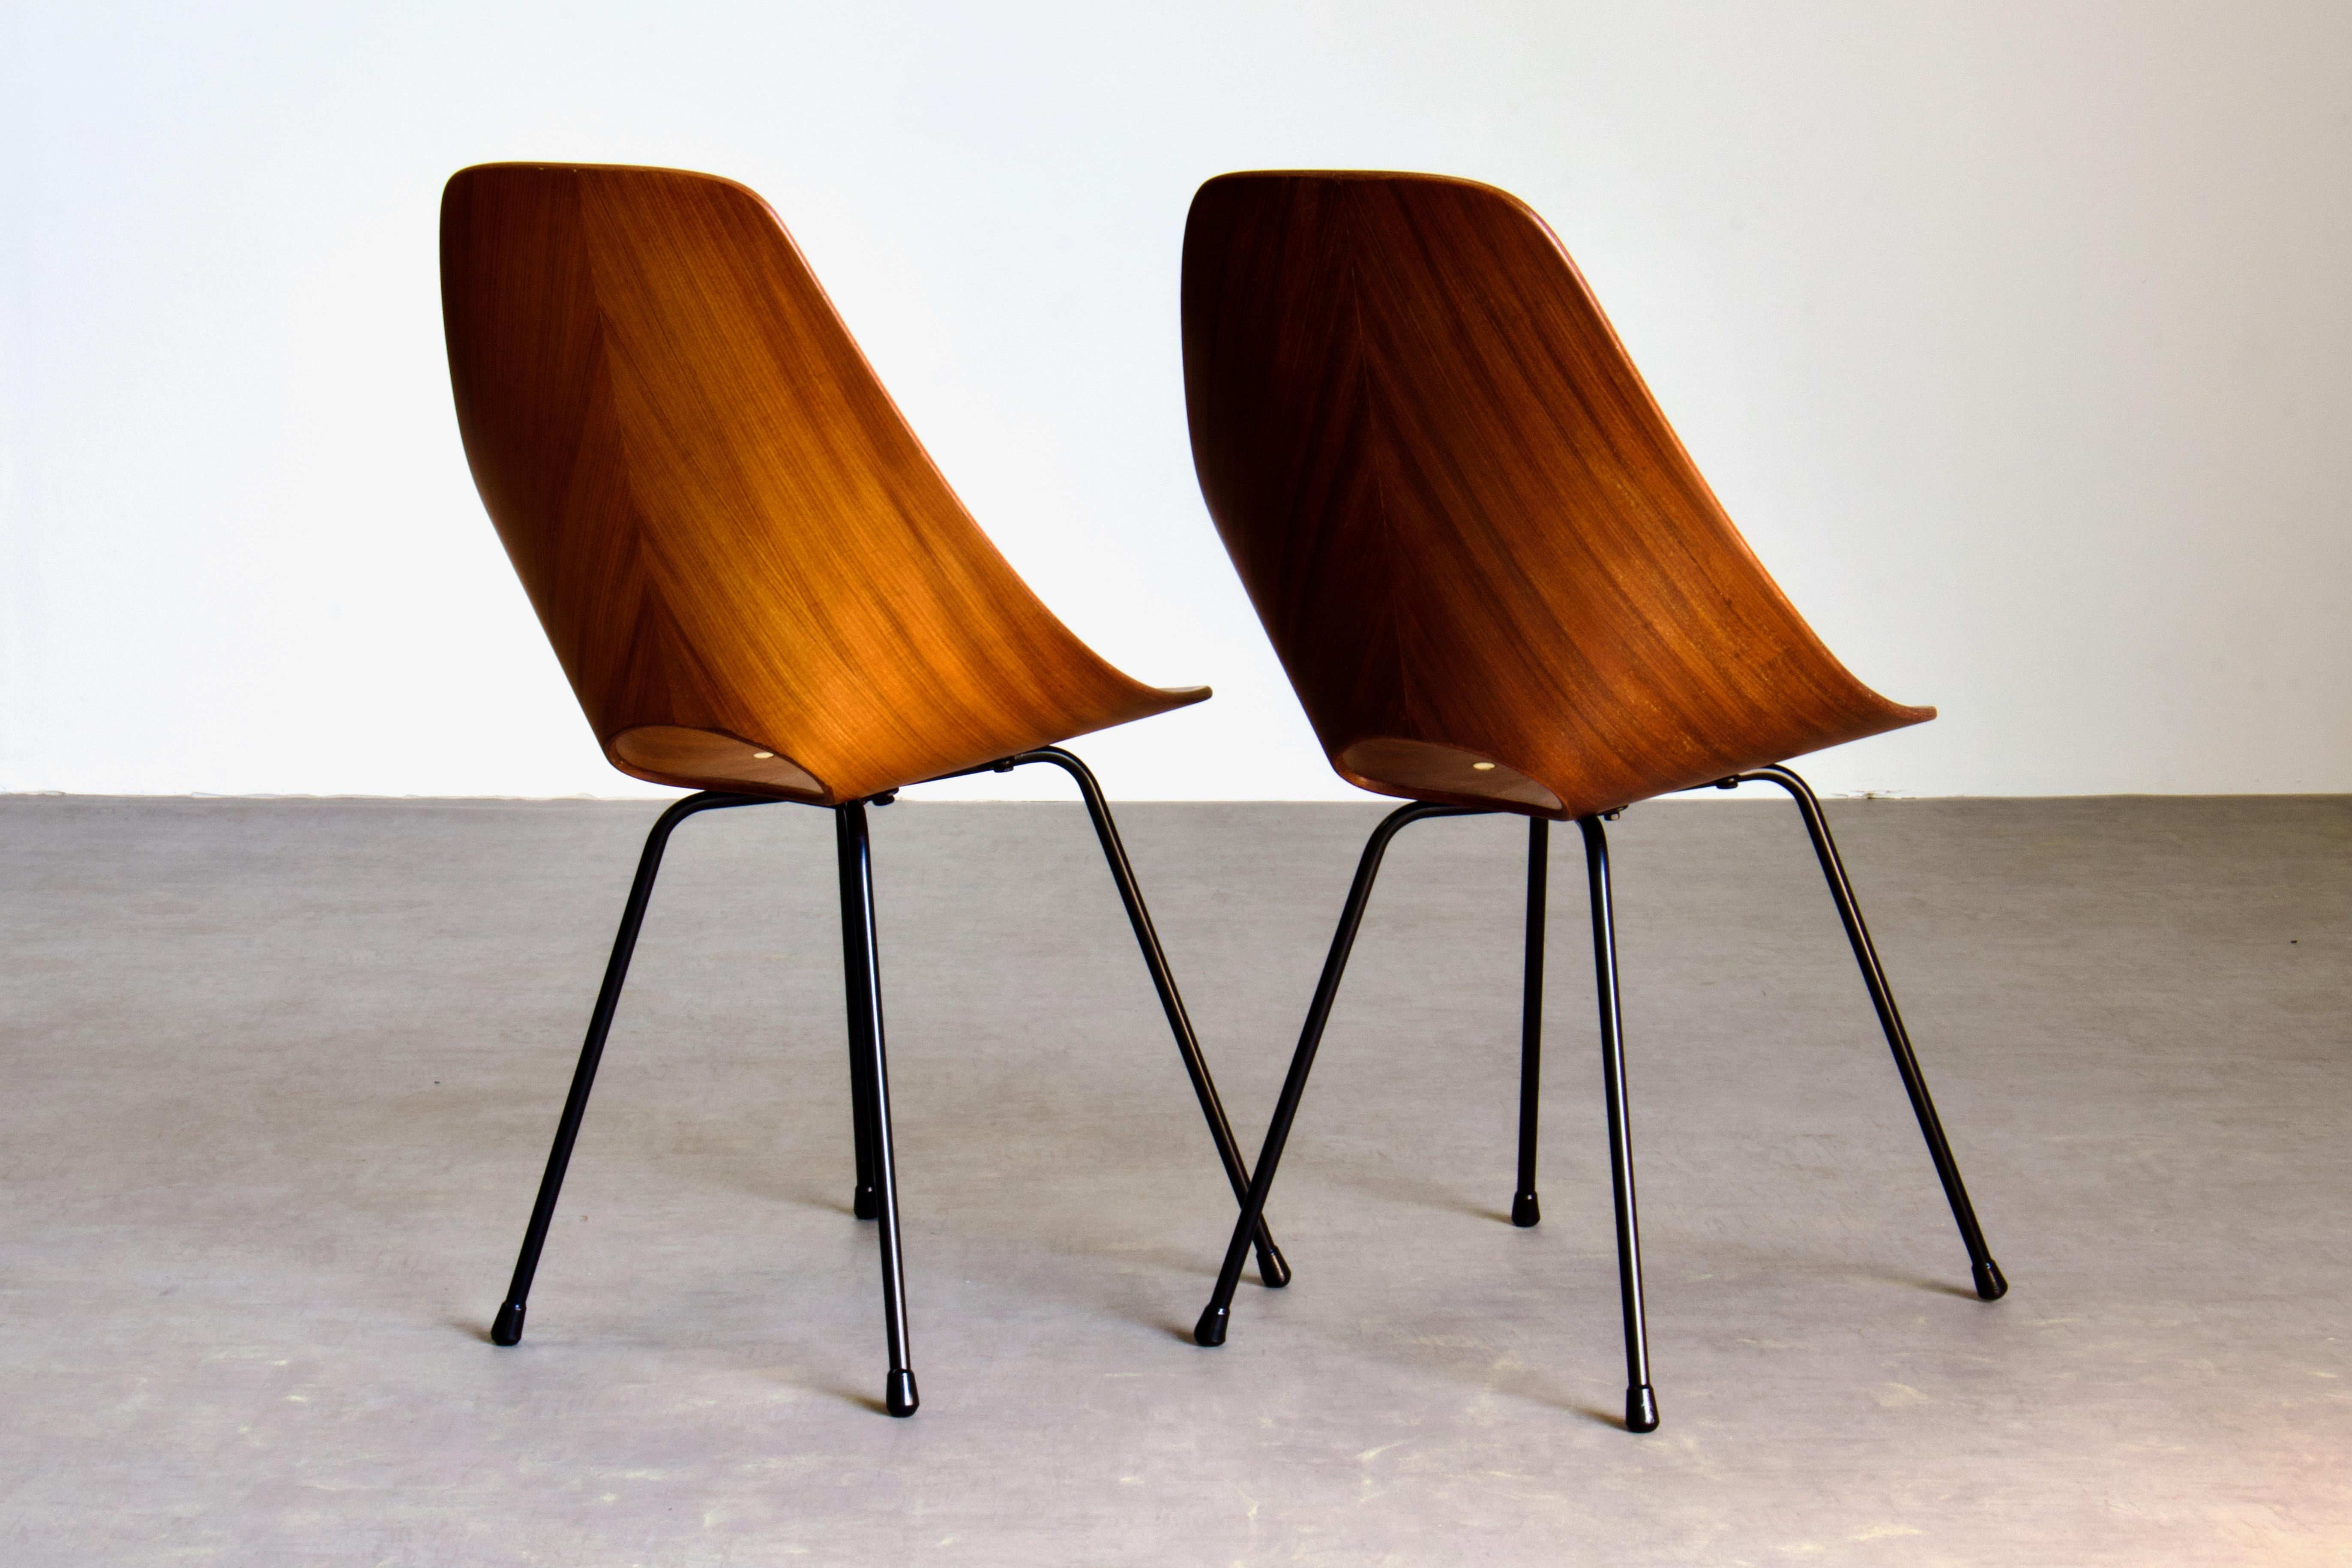 Mid-20th Century Fully Restored Pair of Medea Side Chairs in Exotic Hardwood, Nobili, 1955 Italy For Sale